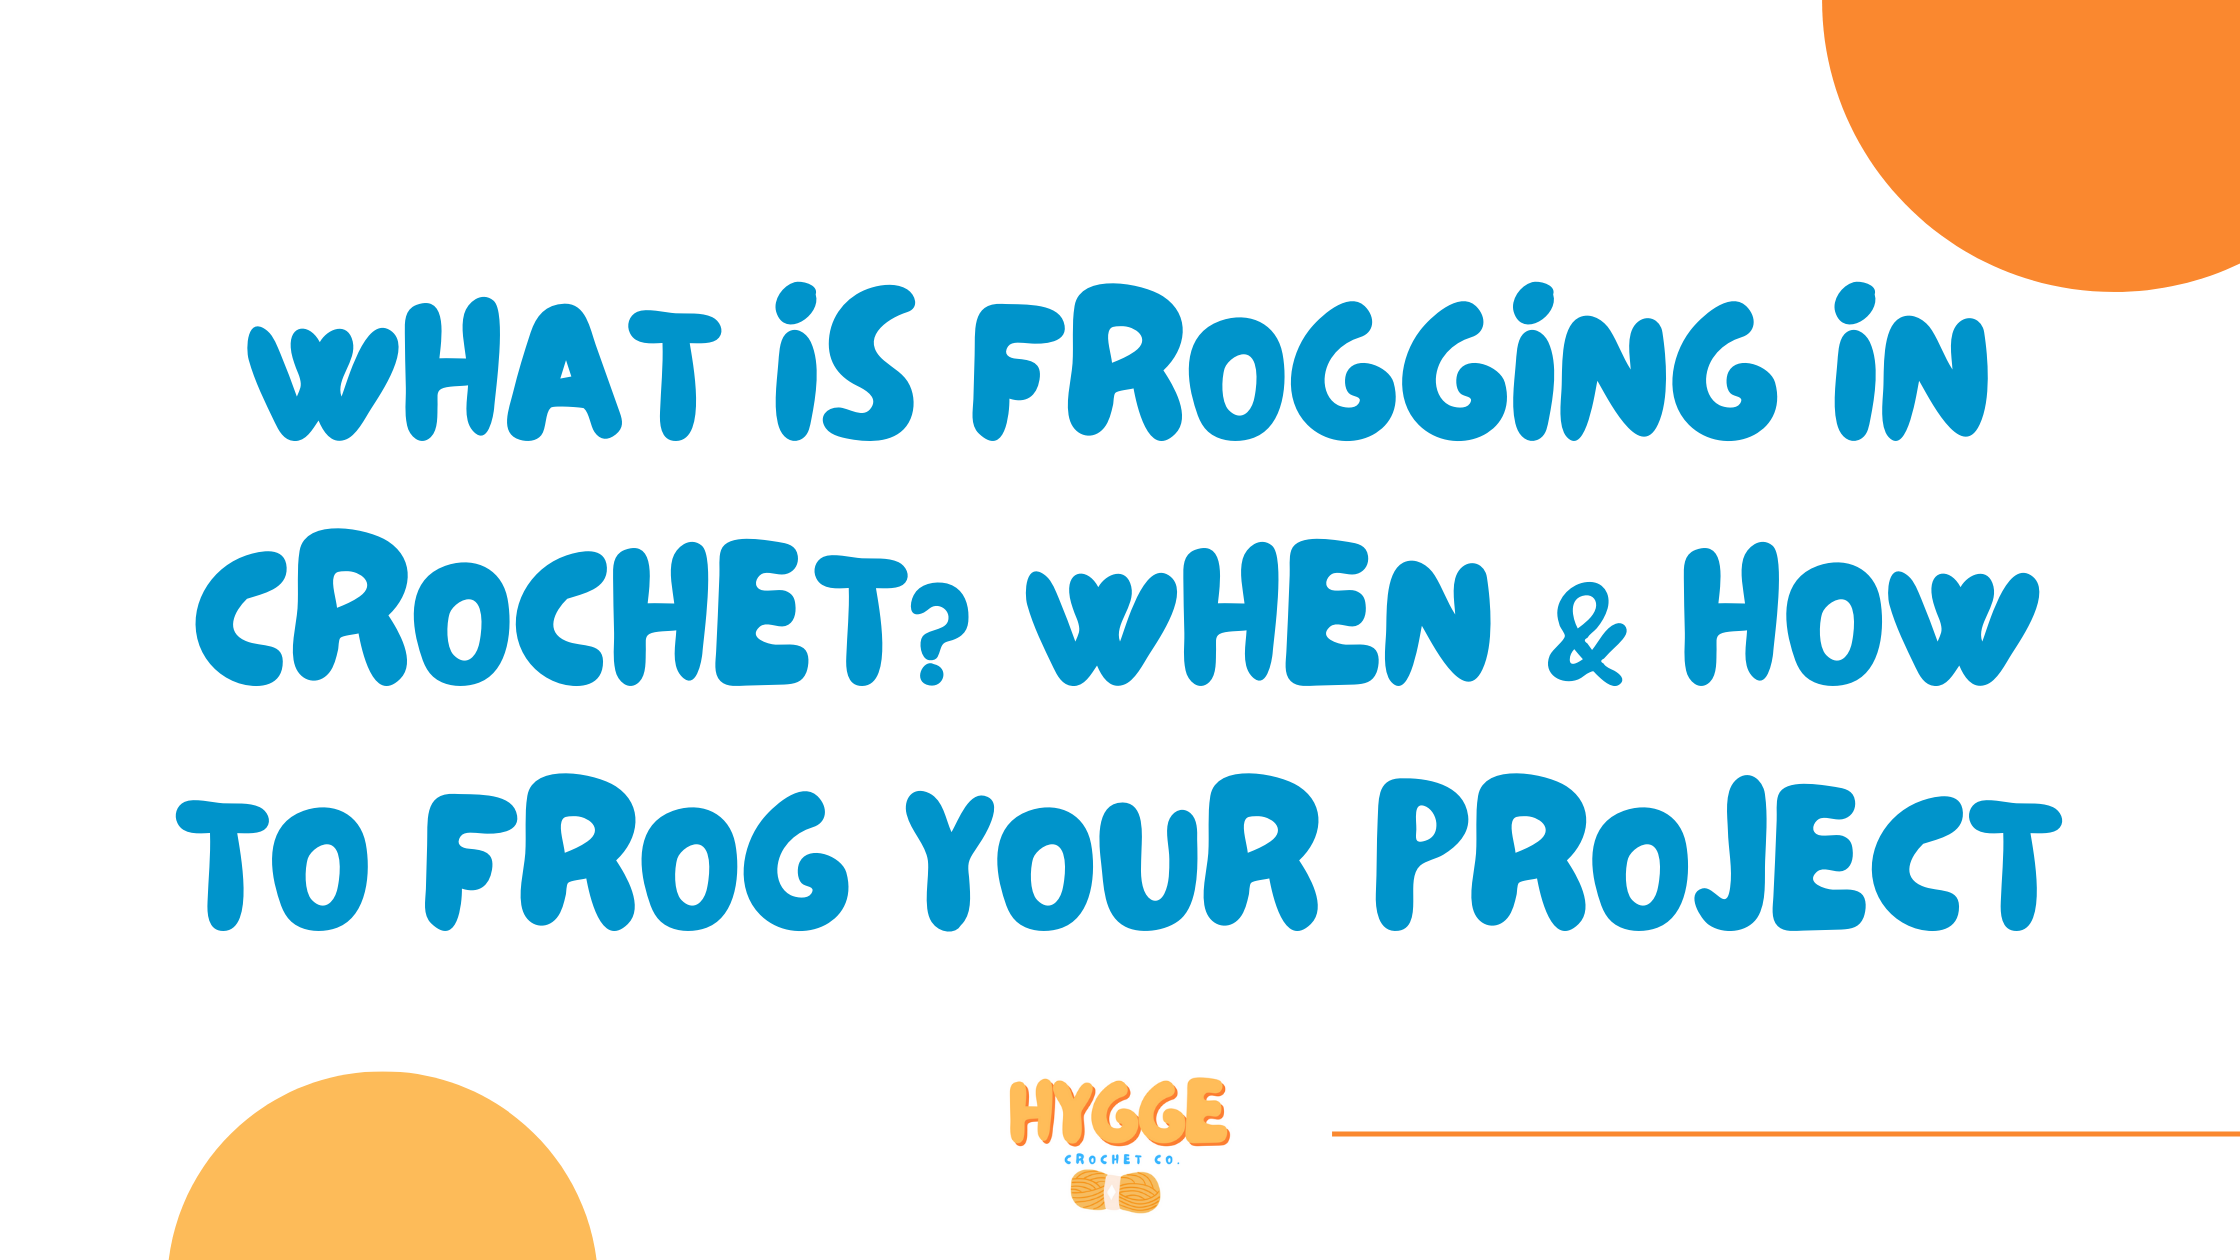 What is Frogging in Crochet? When & How to Frog Your Project